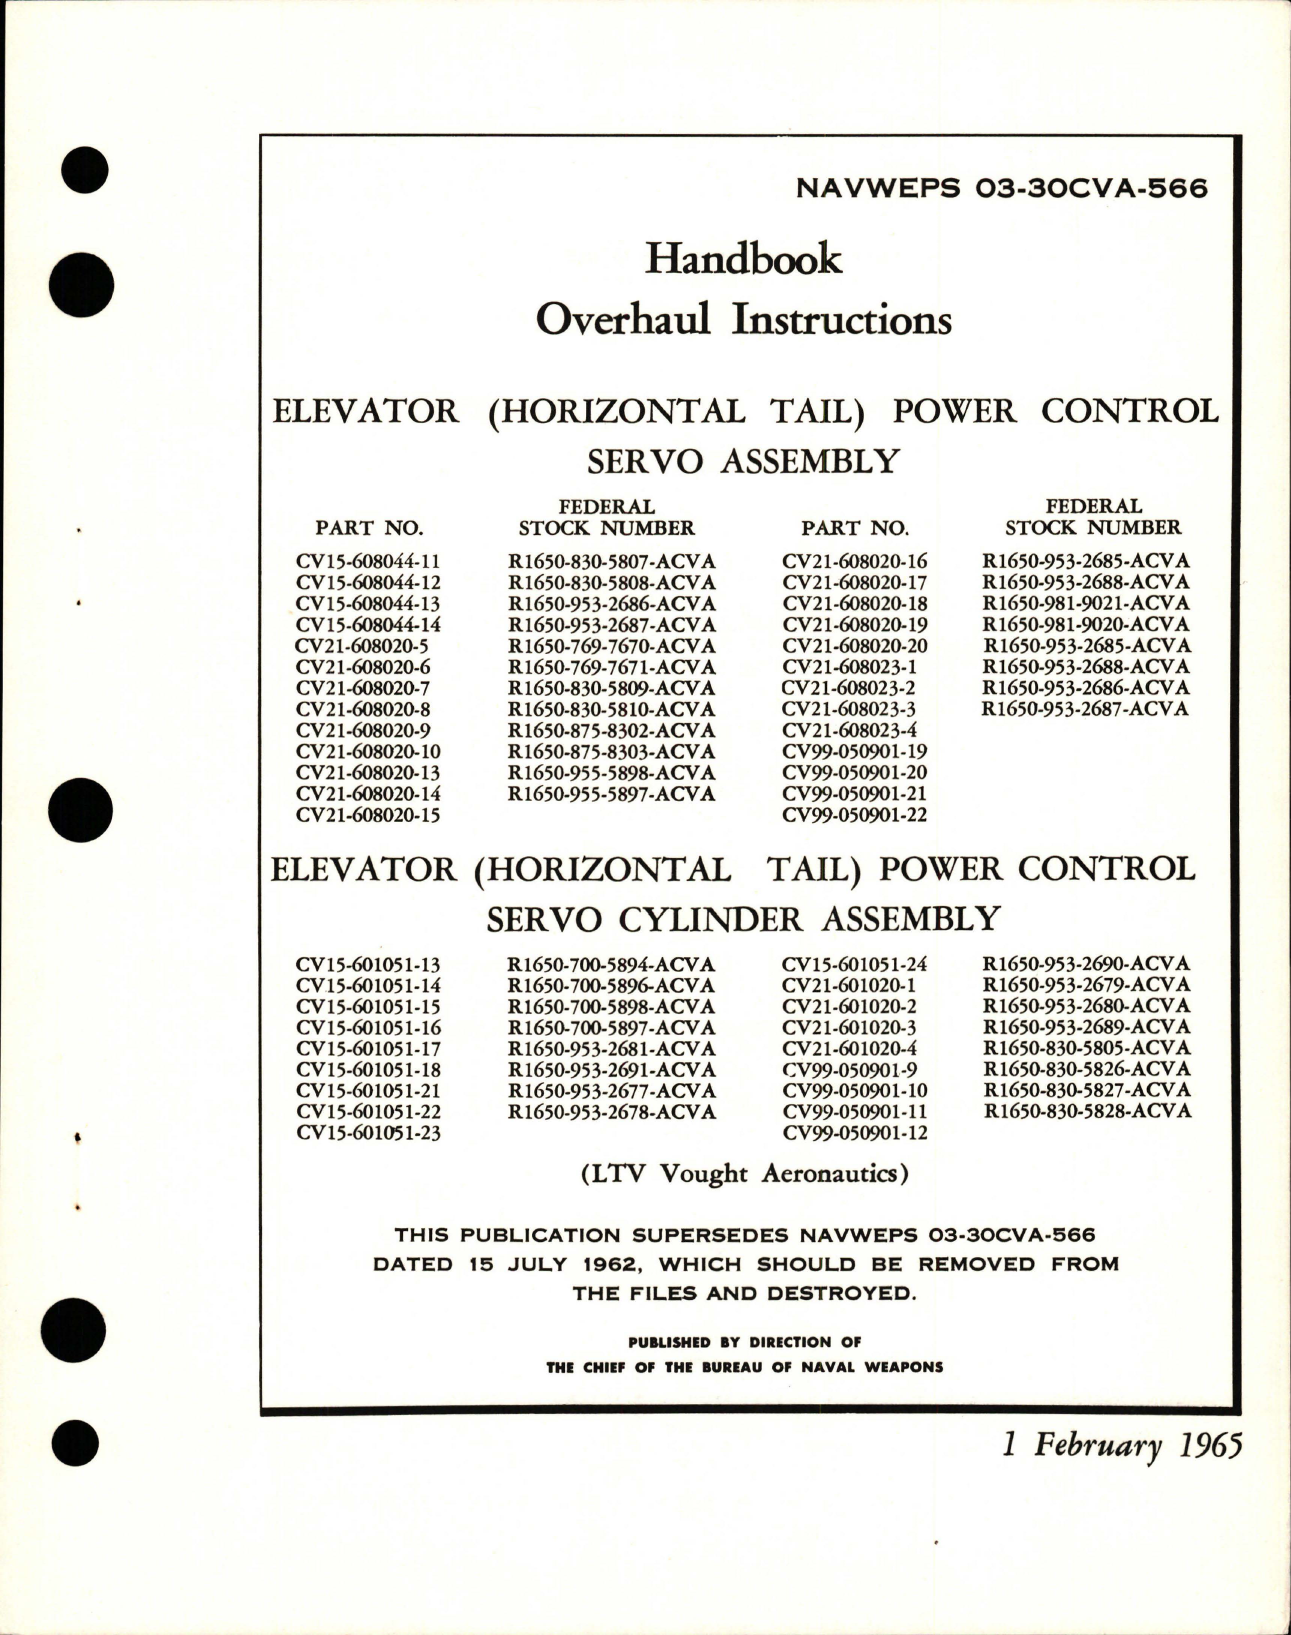 Sample page 1 from AirCorps Library document: Overhaul Instructions for Elevator (Horizontal Tail) Power Control Servo and Servo Cylinder Assembly